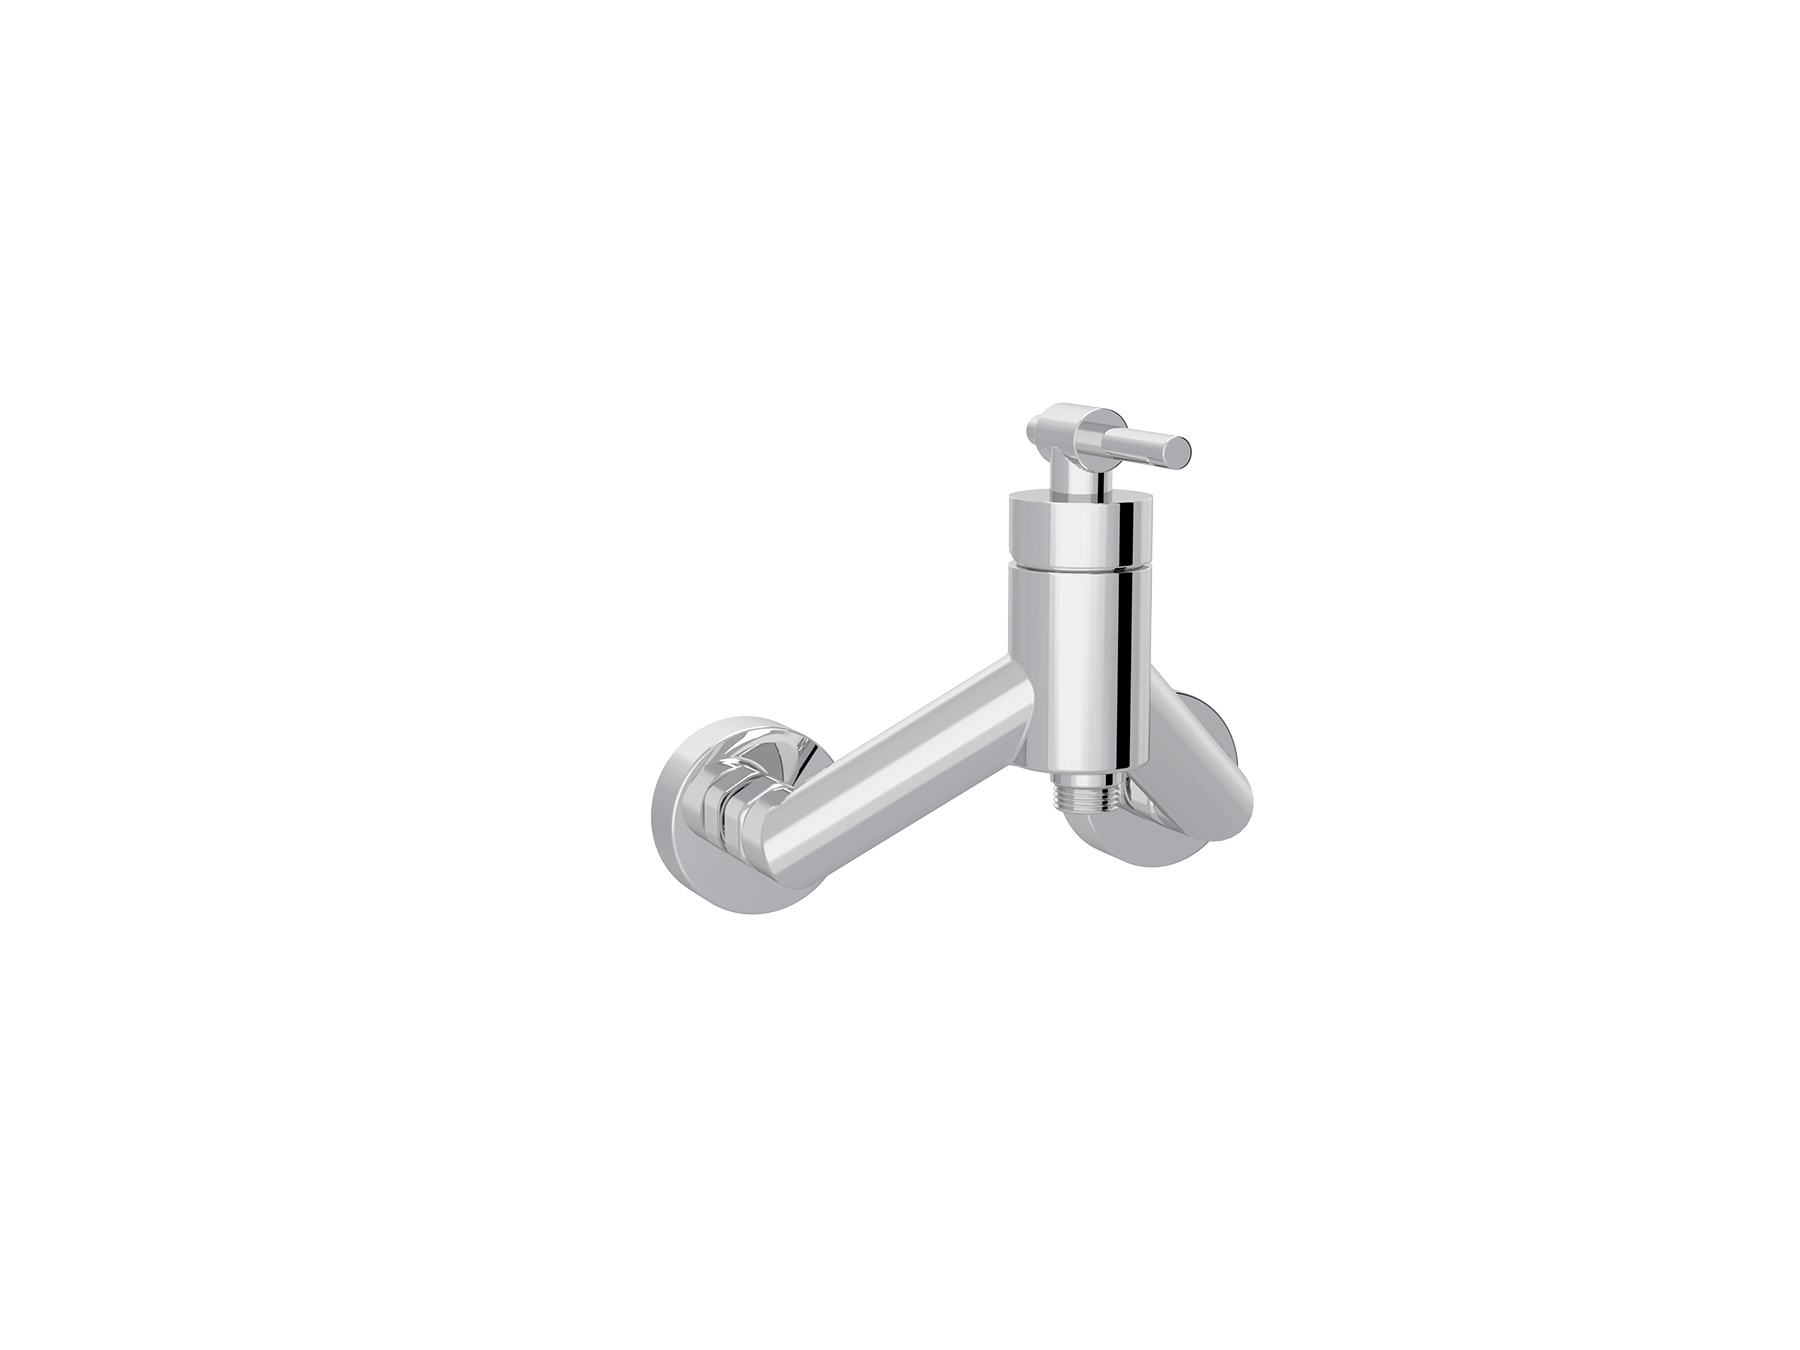 Wall-mounted single-lever shower mixer